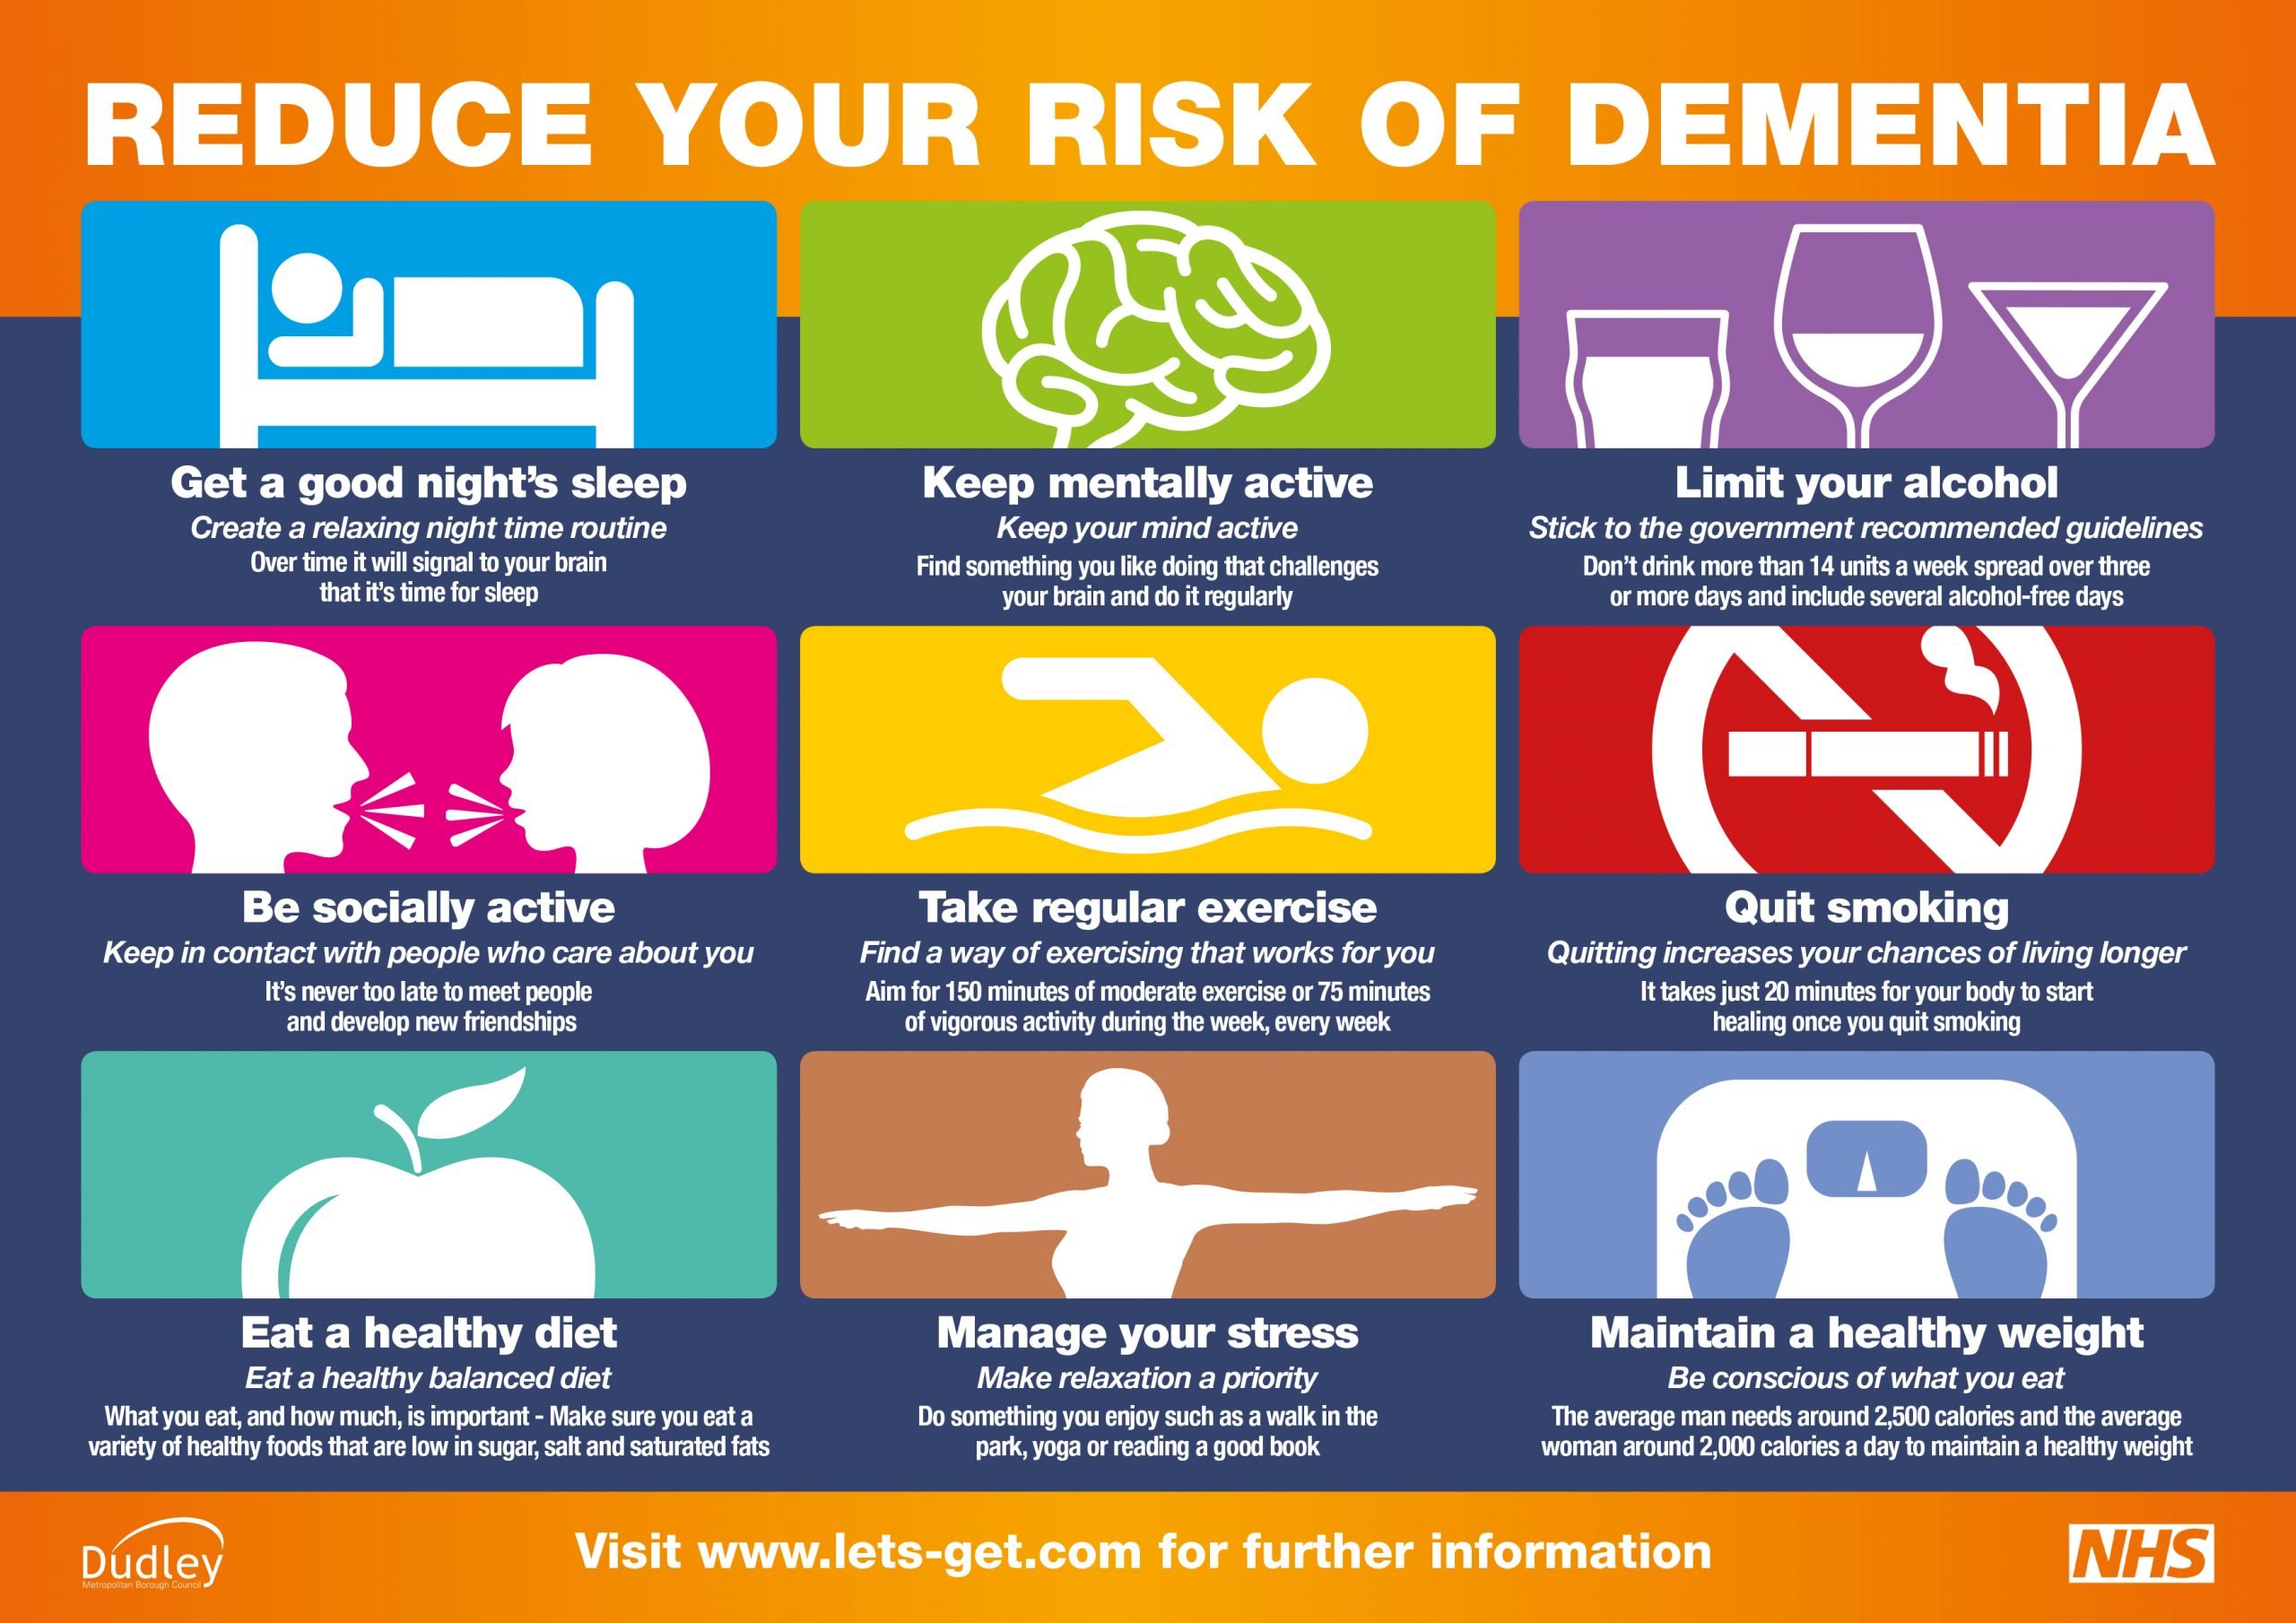 How can I reduce my risks of developing dementia?